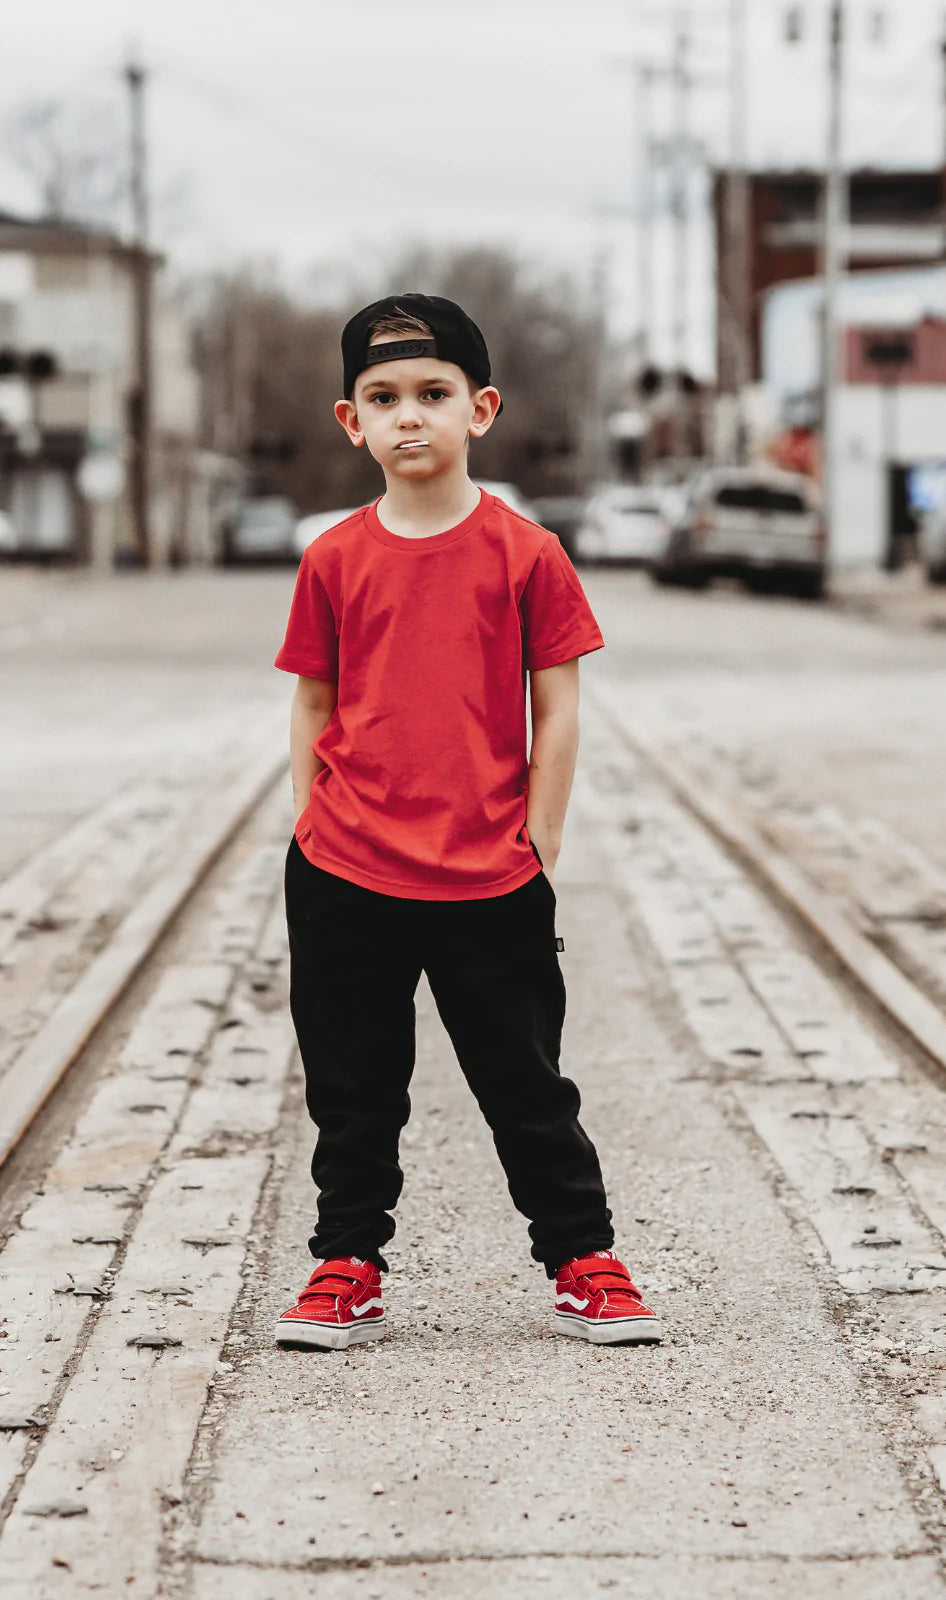 City Threads Cotton Lightweight Fleece Sweat Pants Joggers in 100% Cotton  for Boys & Girls - Made in USA